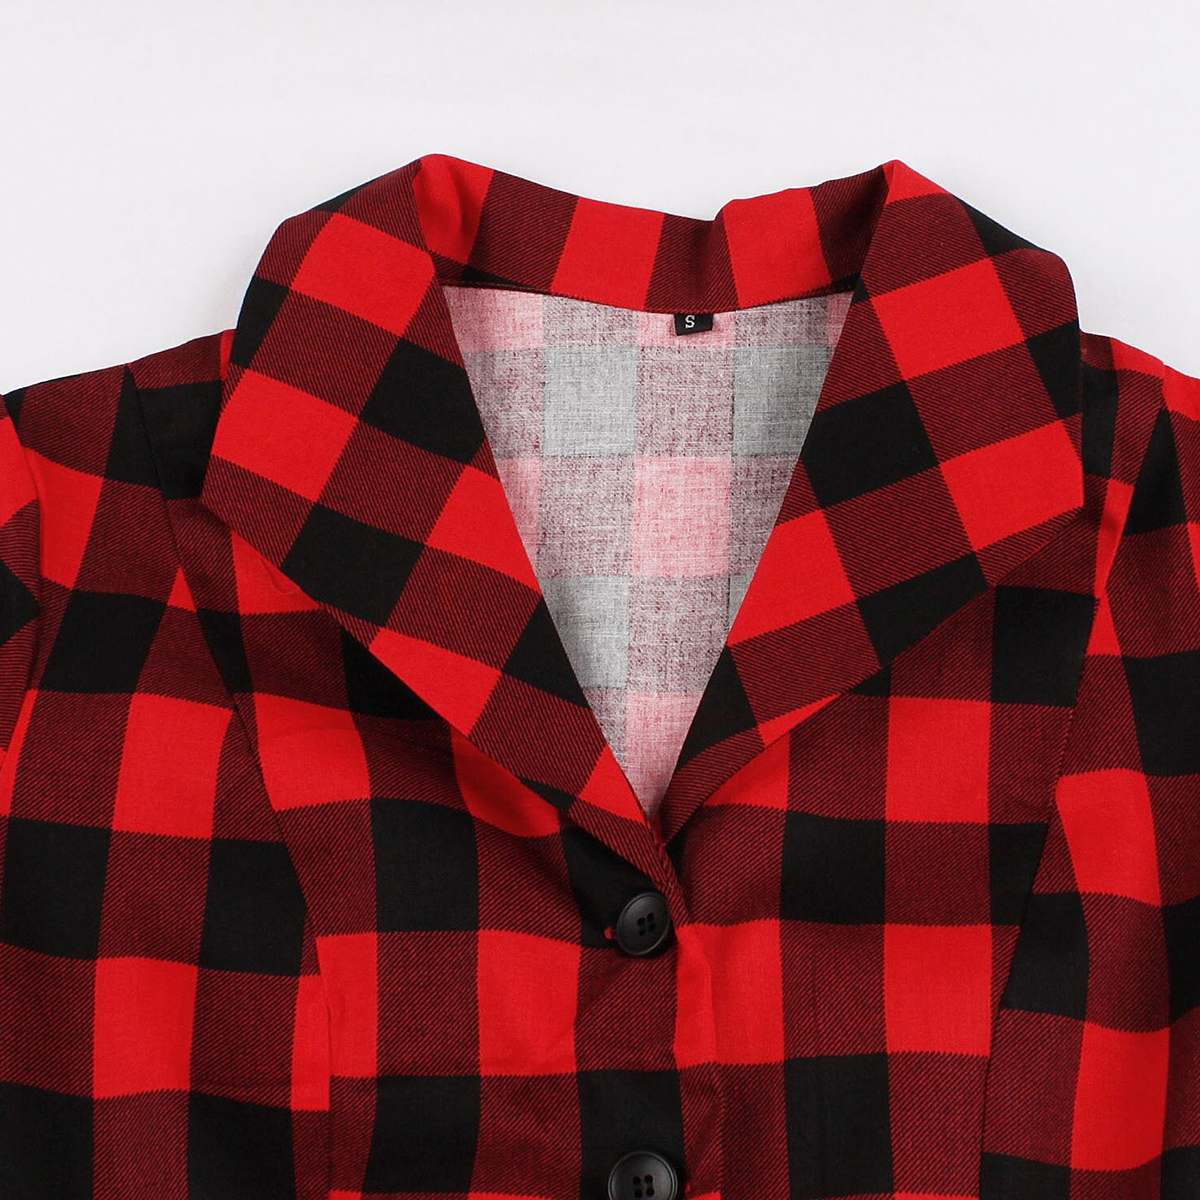 Women Edgy Clothing / Red Plaid Vintage Style Dress / Cotton Zipper Flared Dresses - HARD'N'HEAVY